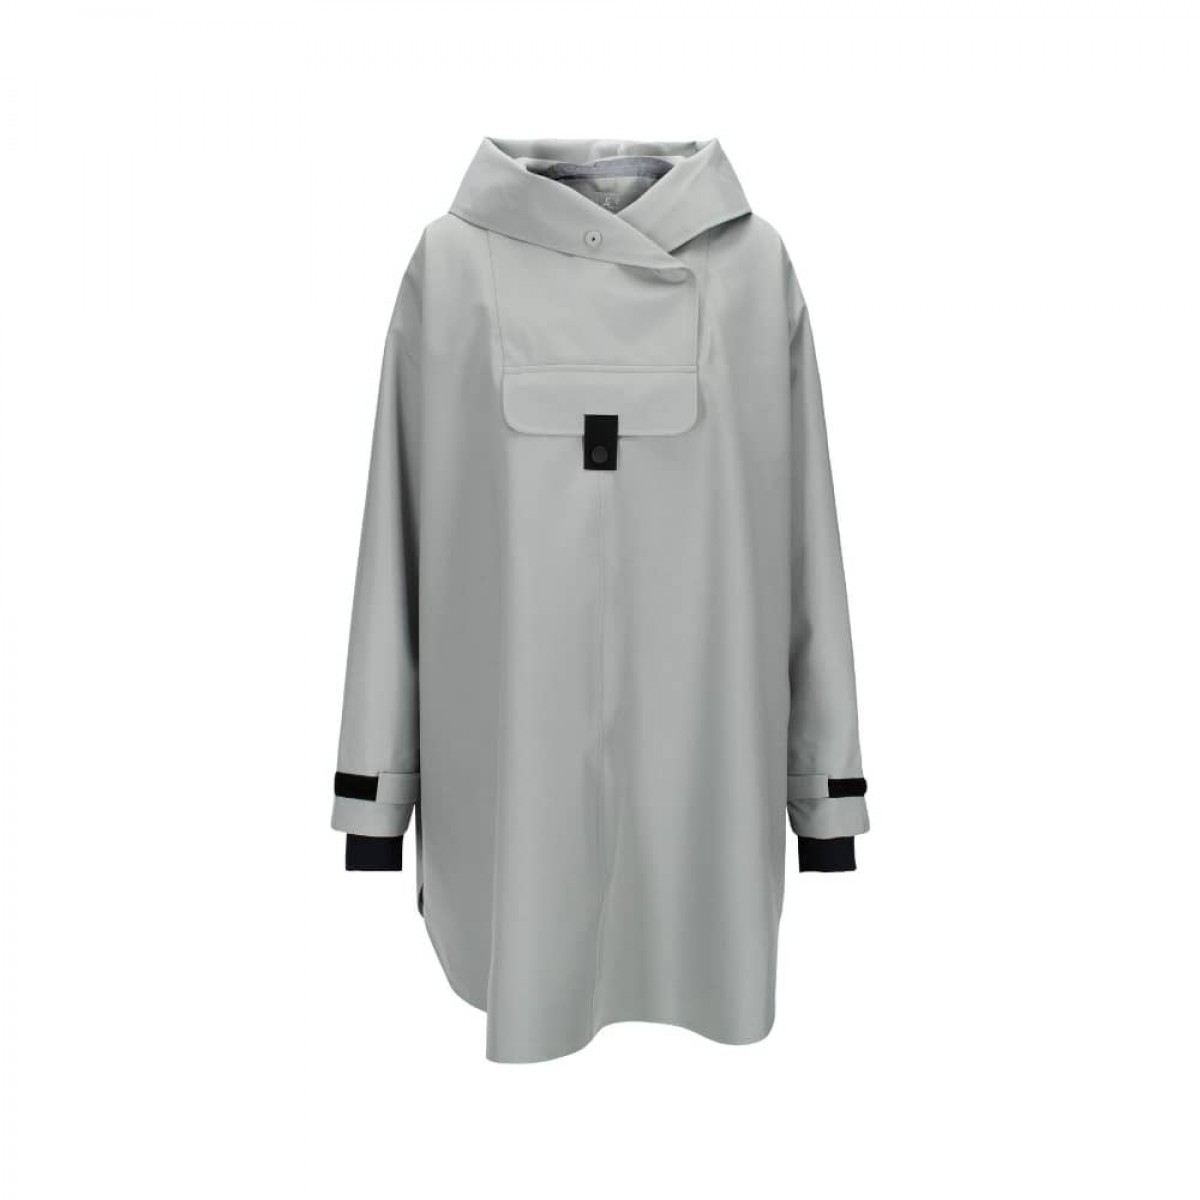 bergen regn poncho - gray - front